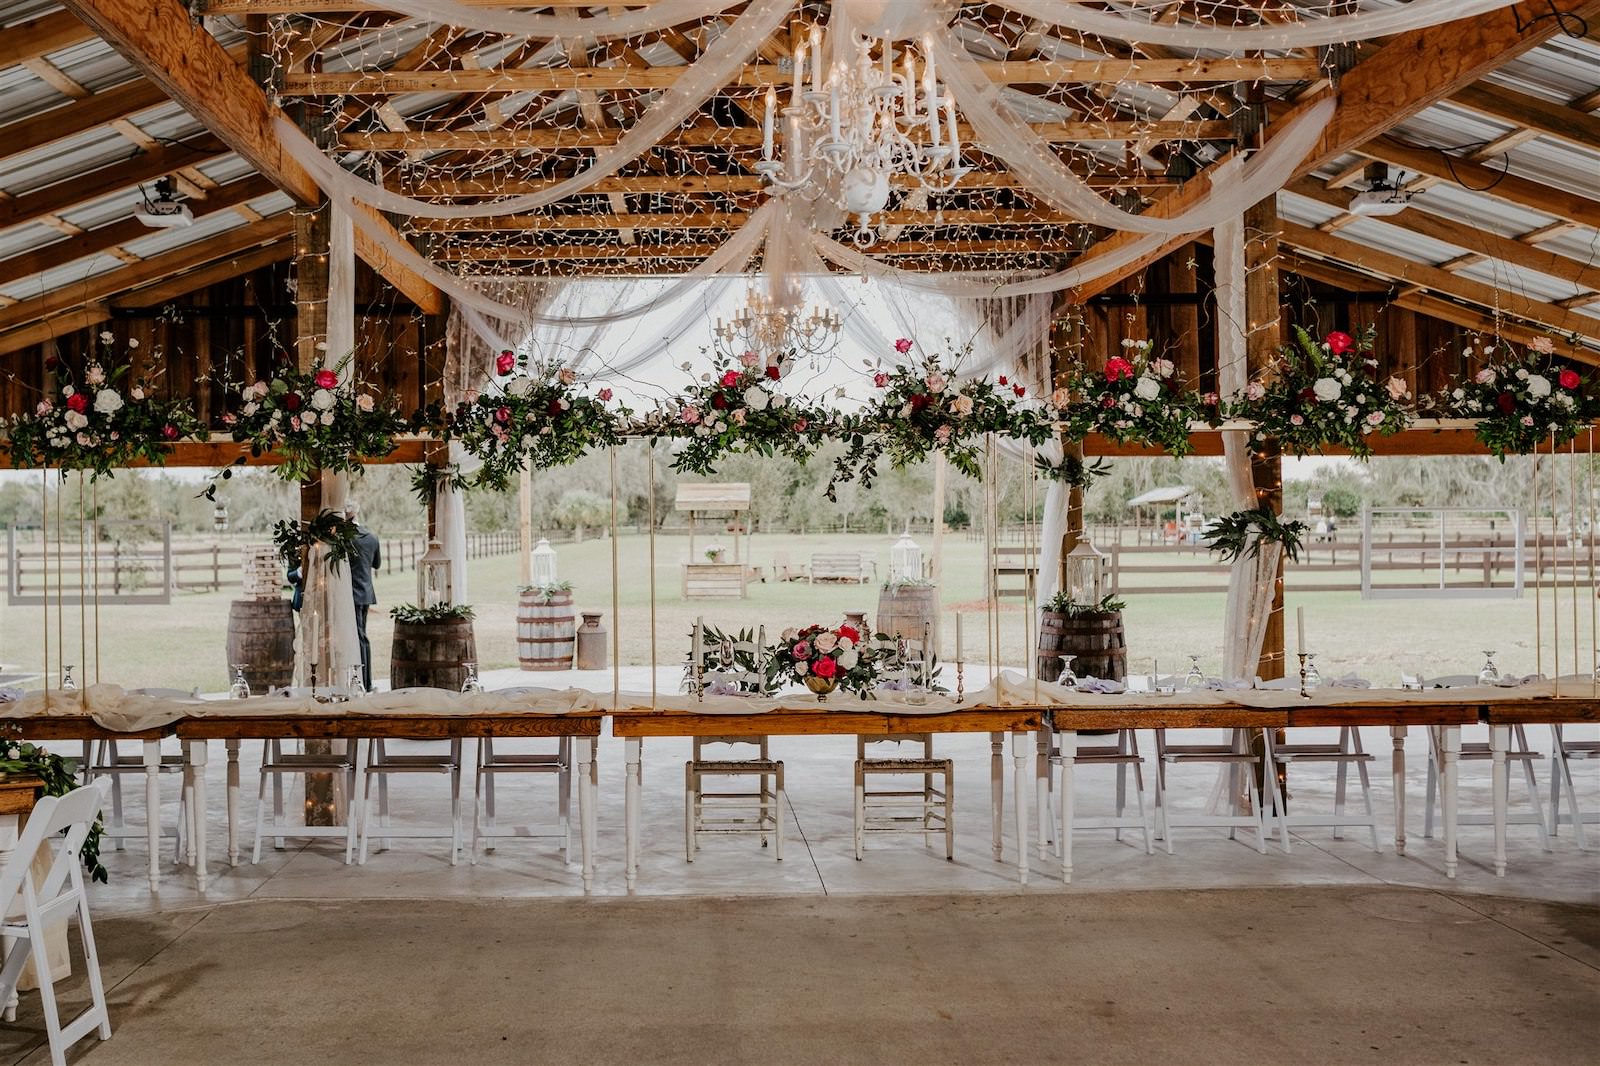 Rustic Barn Tampa Wedding with Suspended Ceiling Floral Arrangements with Blush Pink and Deep Red Burgundy Roses and Greenery | Wood Farm Tables with Champagne Linen Runners and Taper Candlestick Candles | Tampa Wedding Florist Monarch Events and Designs